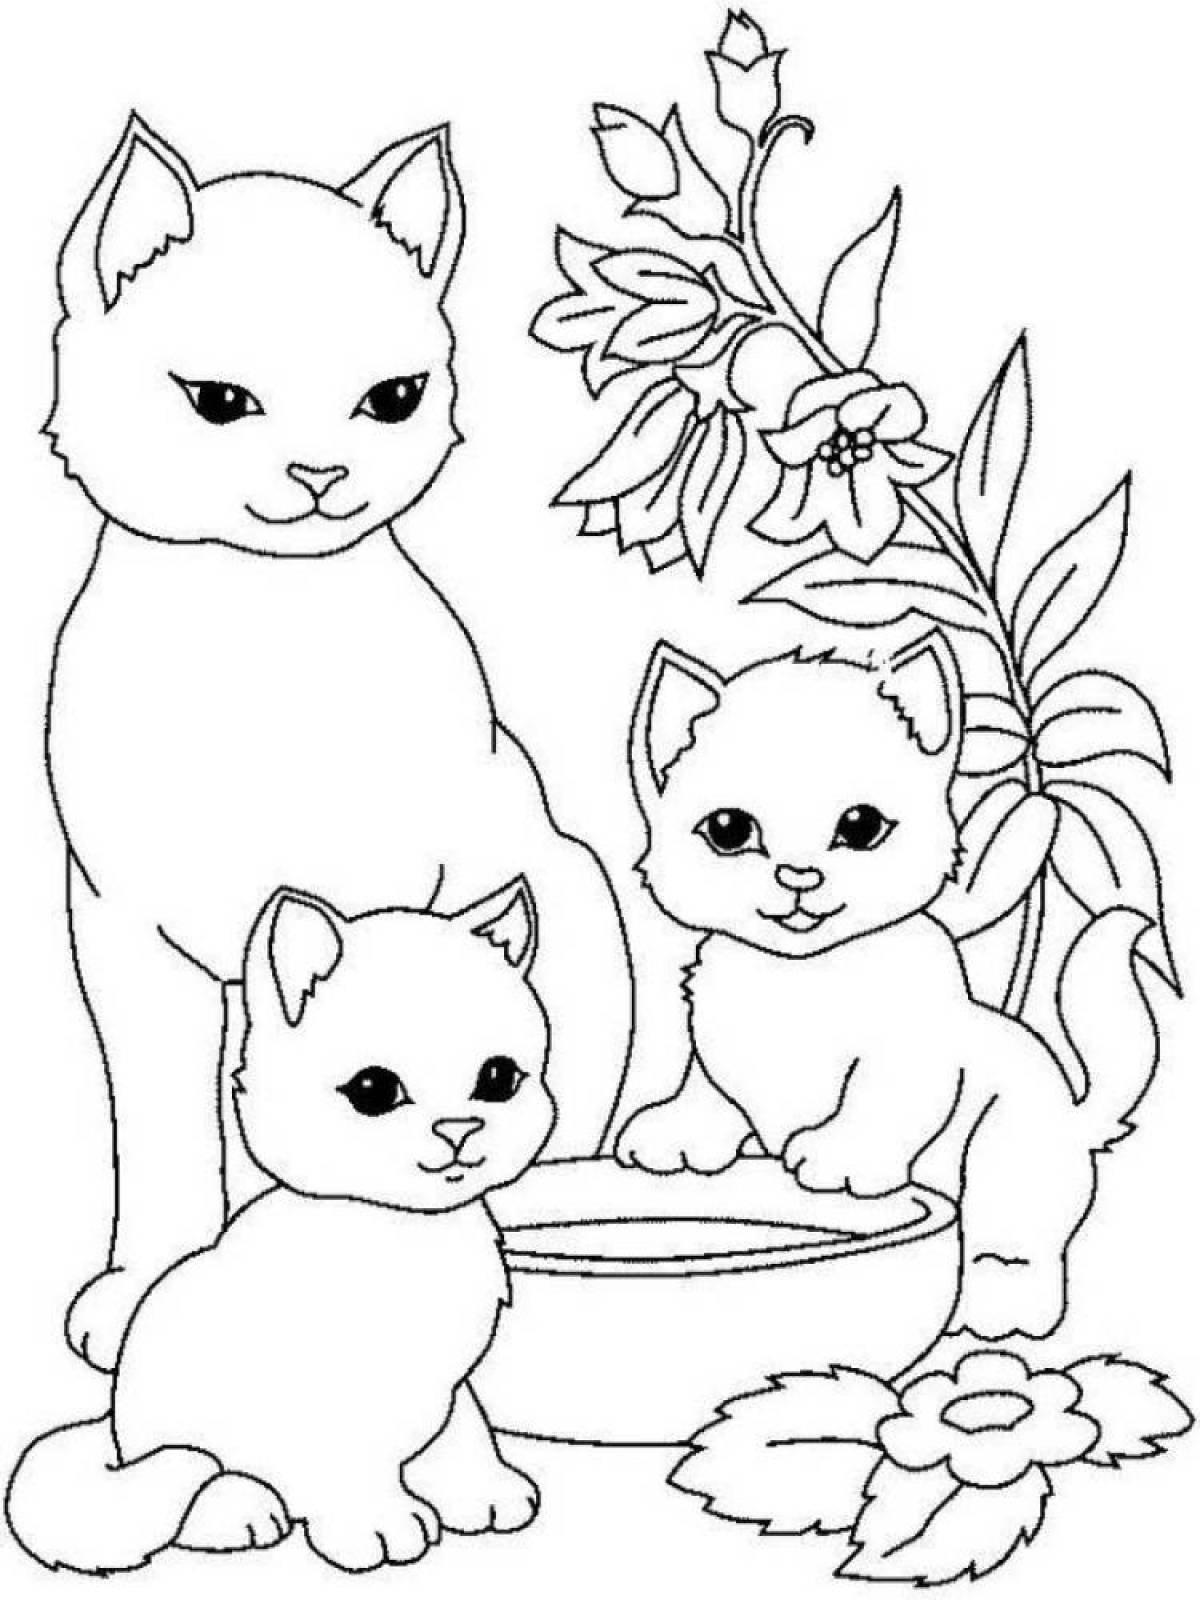 Coloring page friendly cat for kids